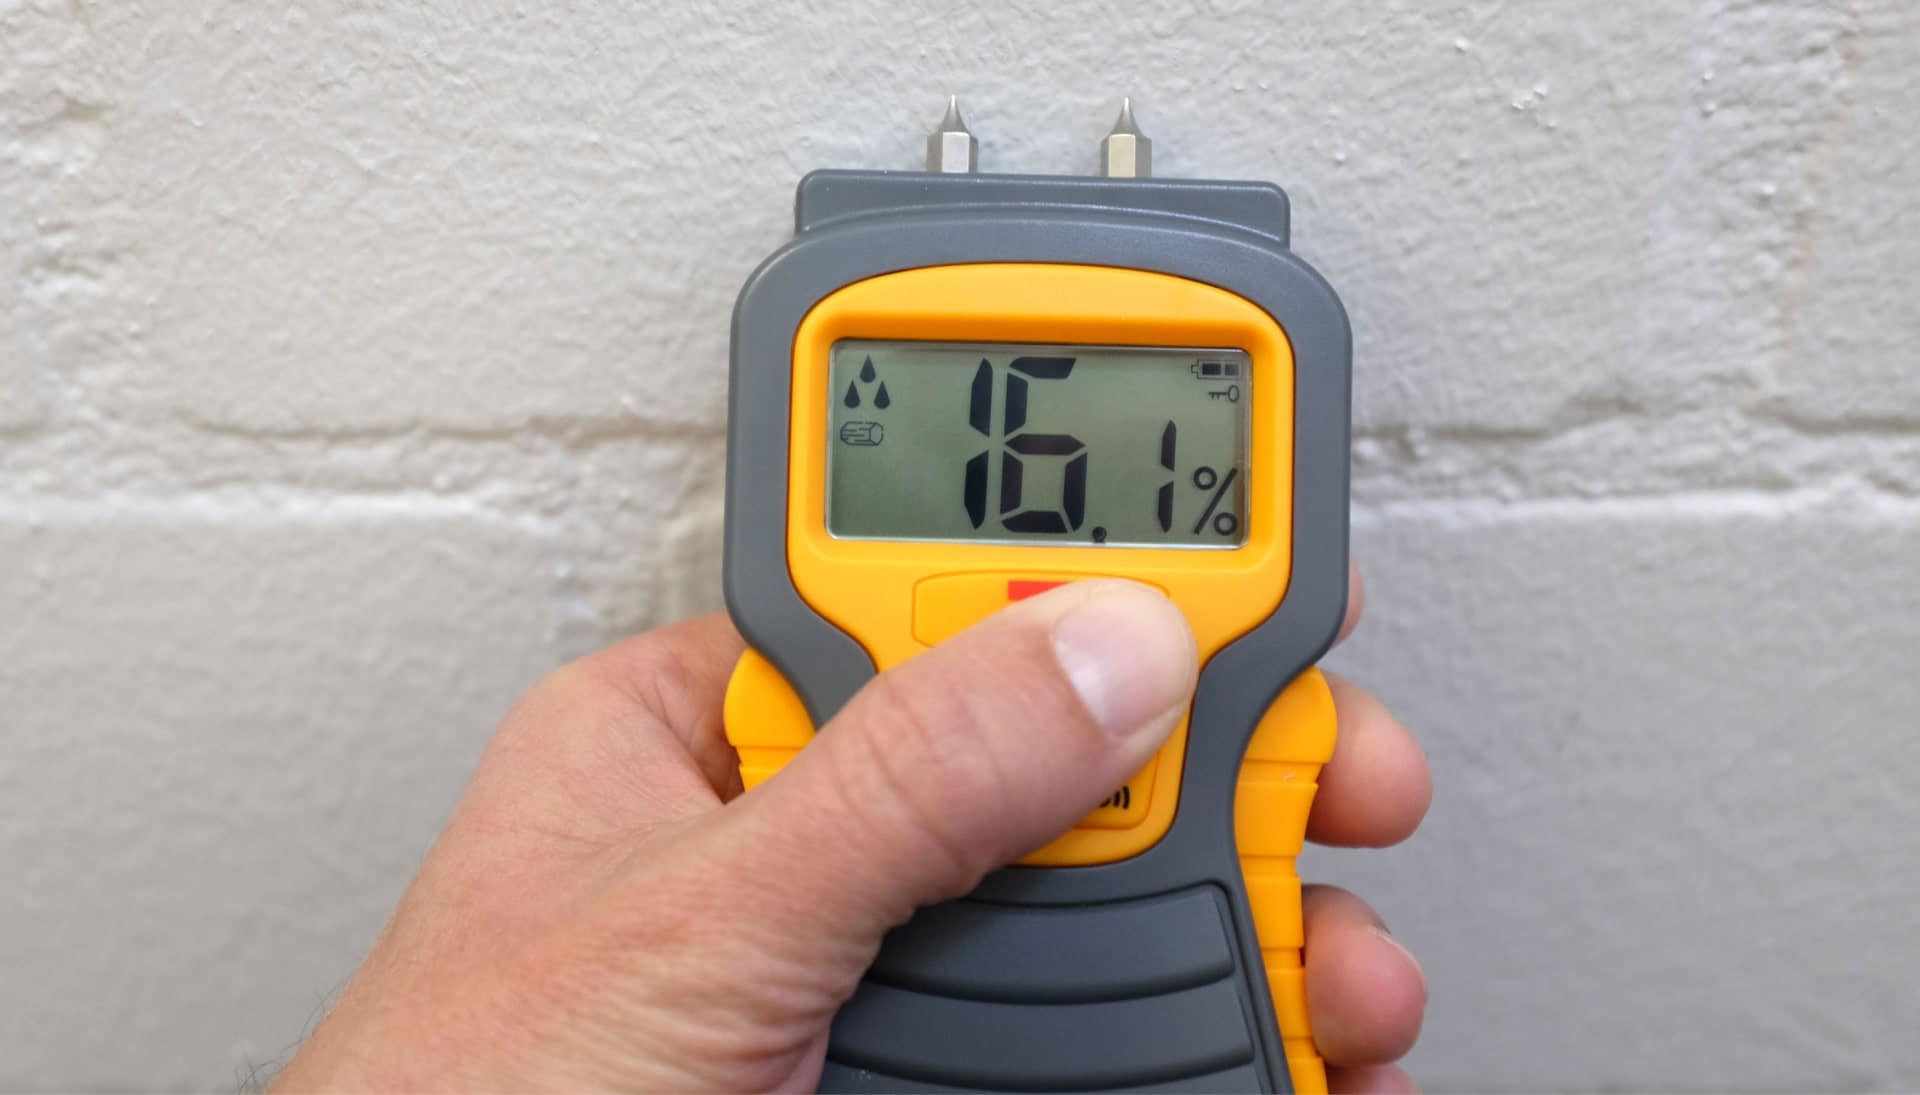 We provide fast, accurate, and affordable mold testing services in Raleigh, North Carolina.